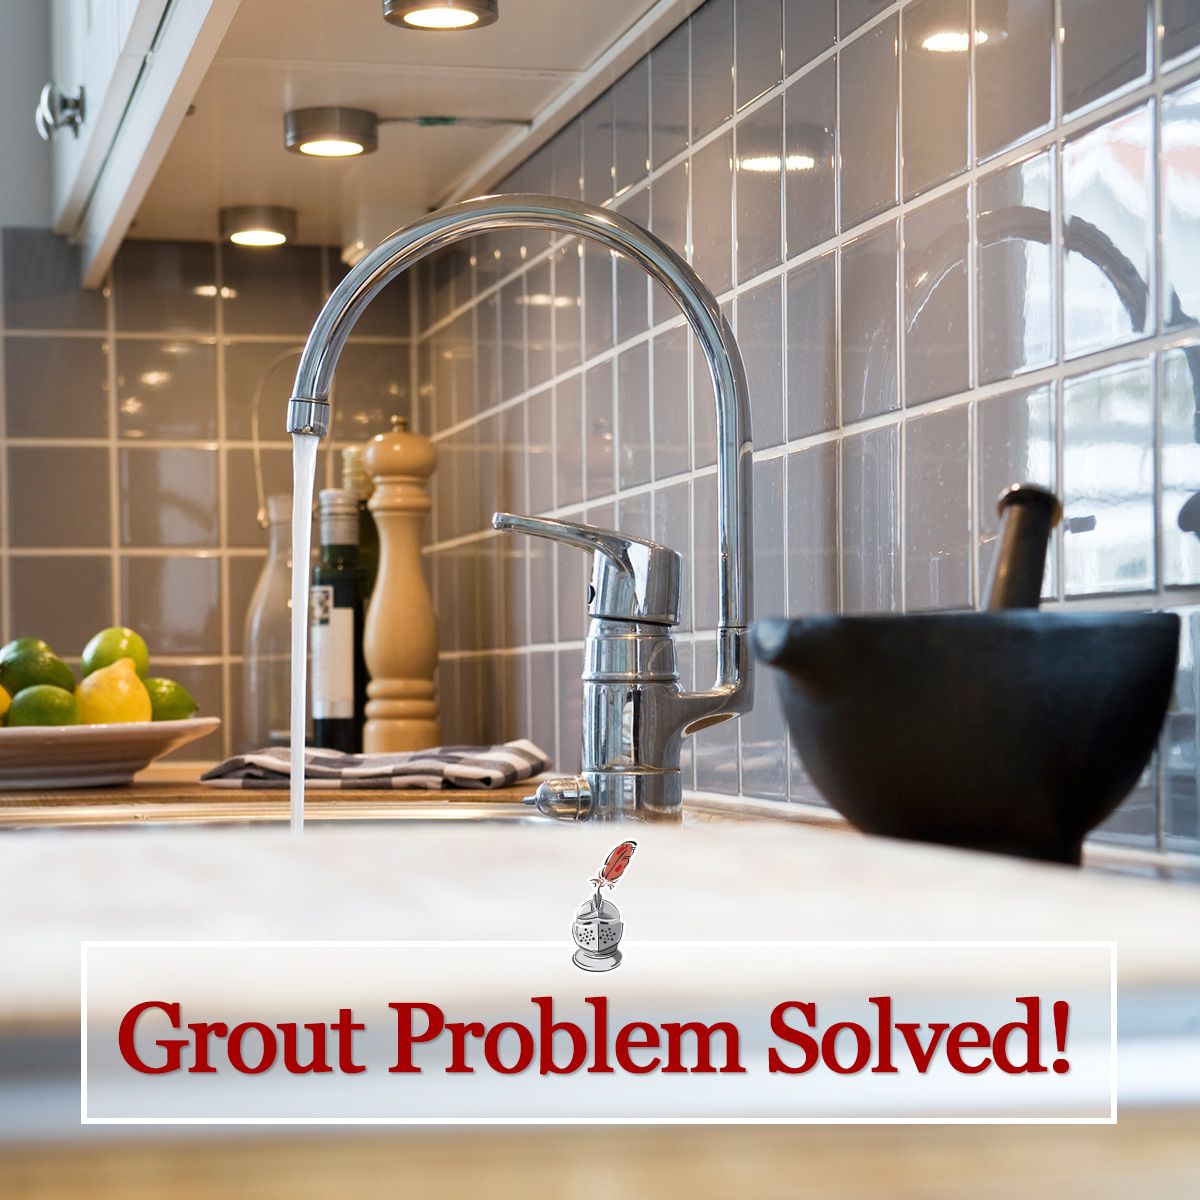 Grout Problem Solved!